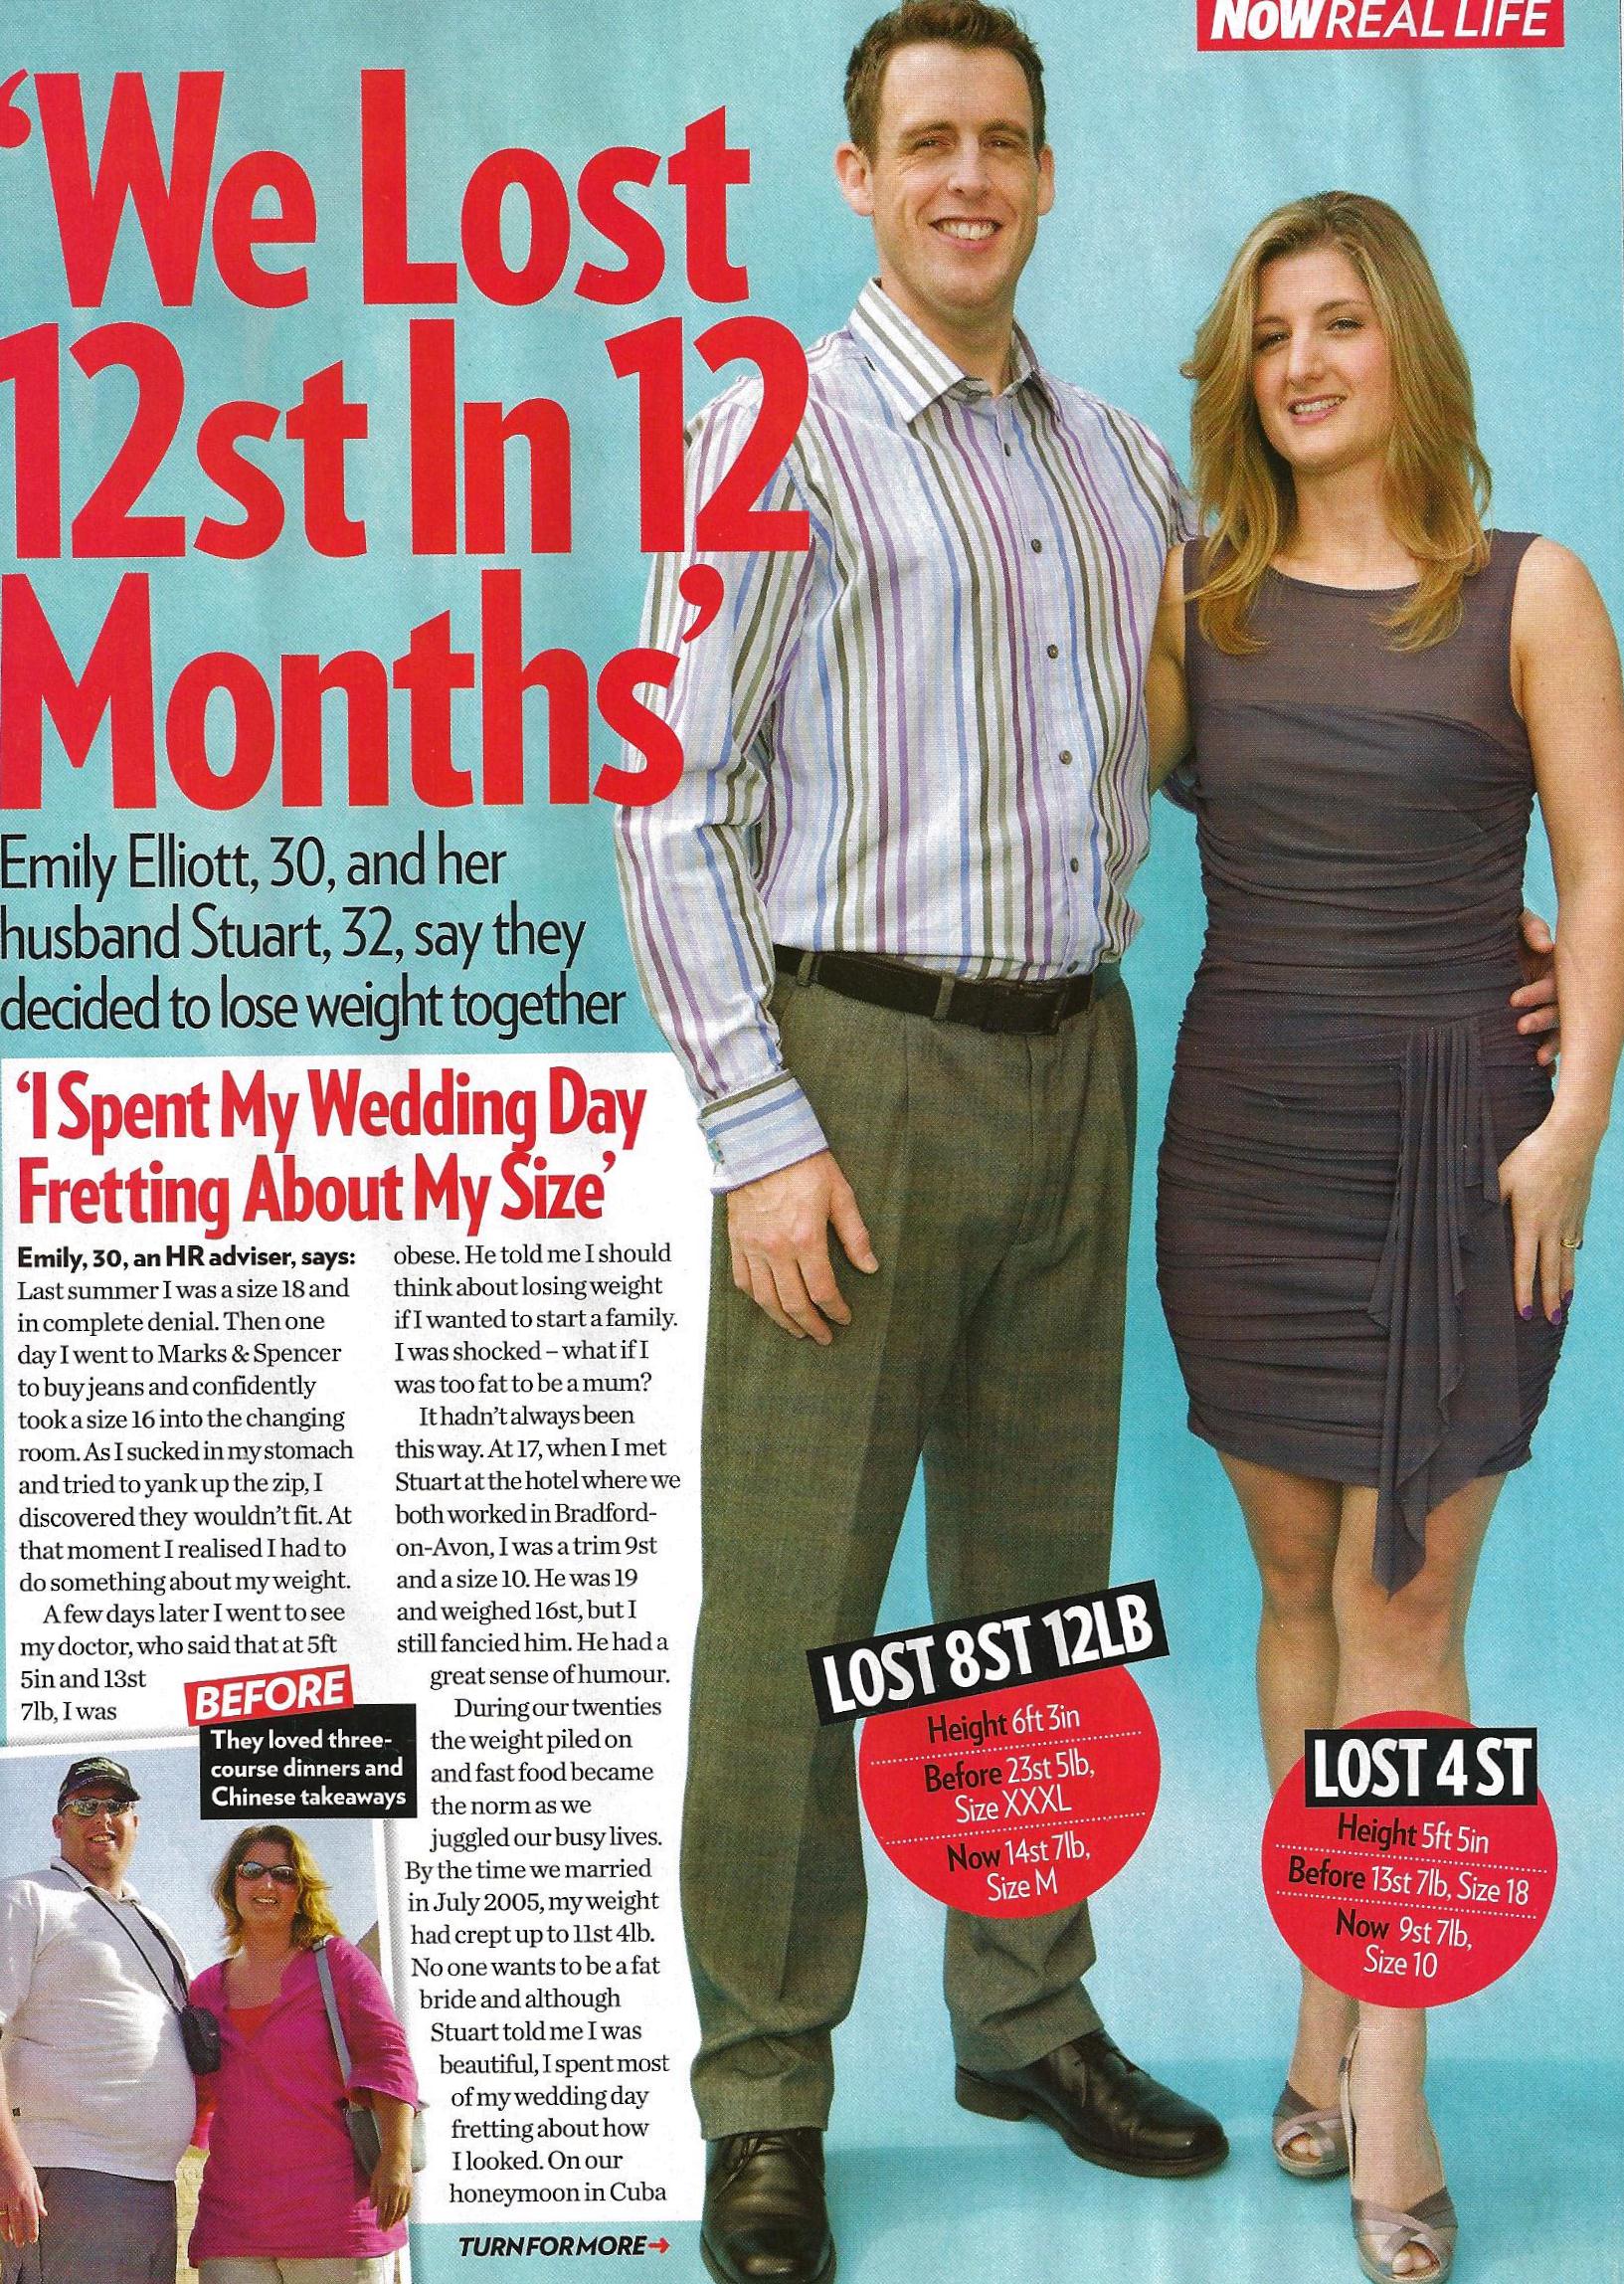 Couple share their incredible weight loss story with Now magazine - Talk to The Press photo